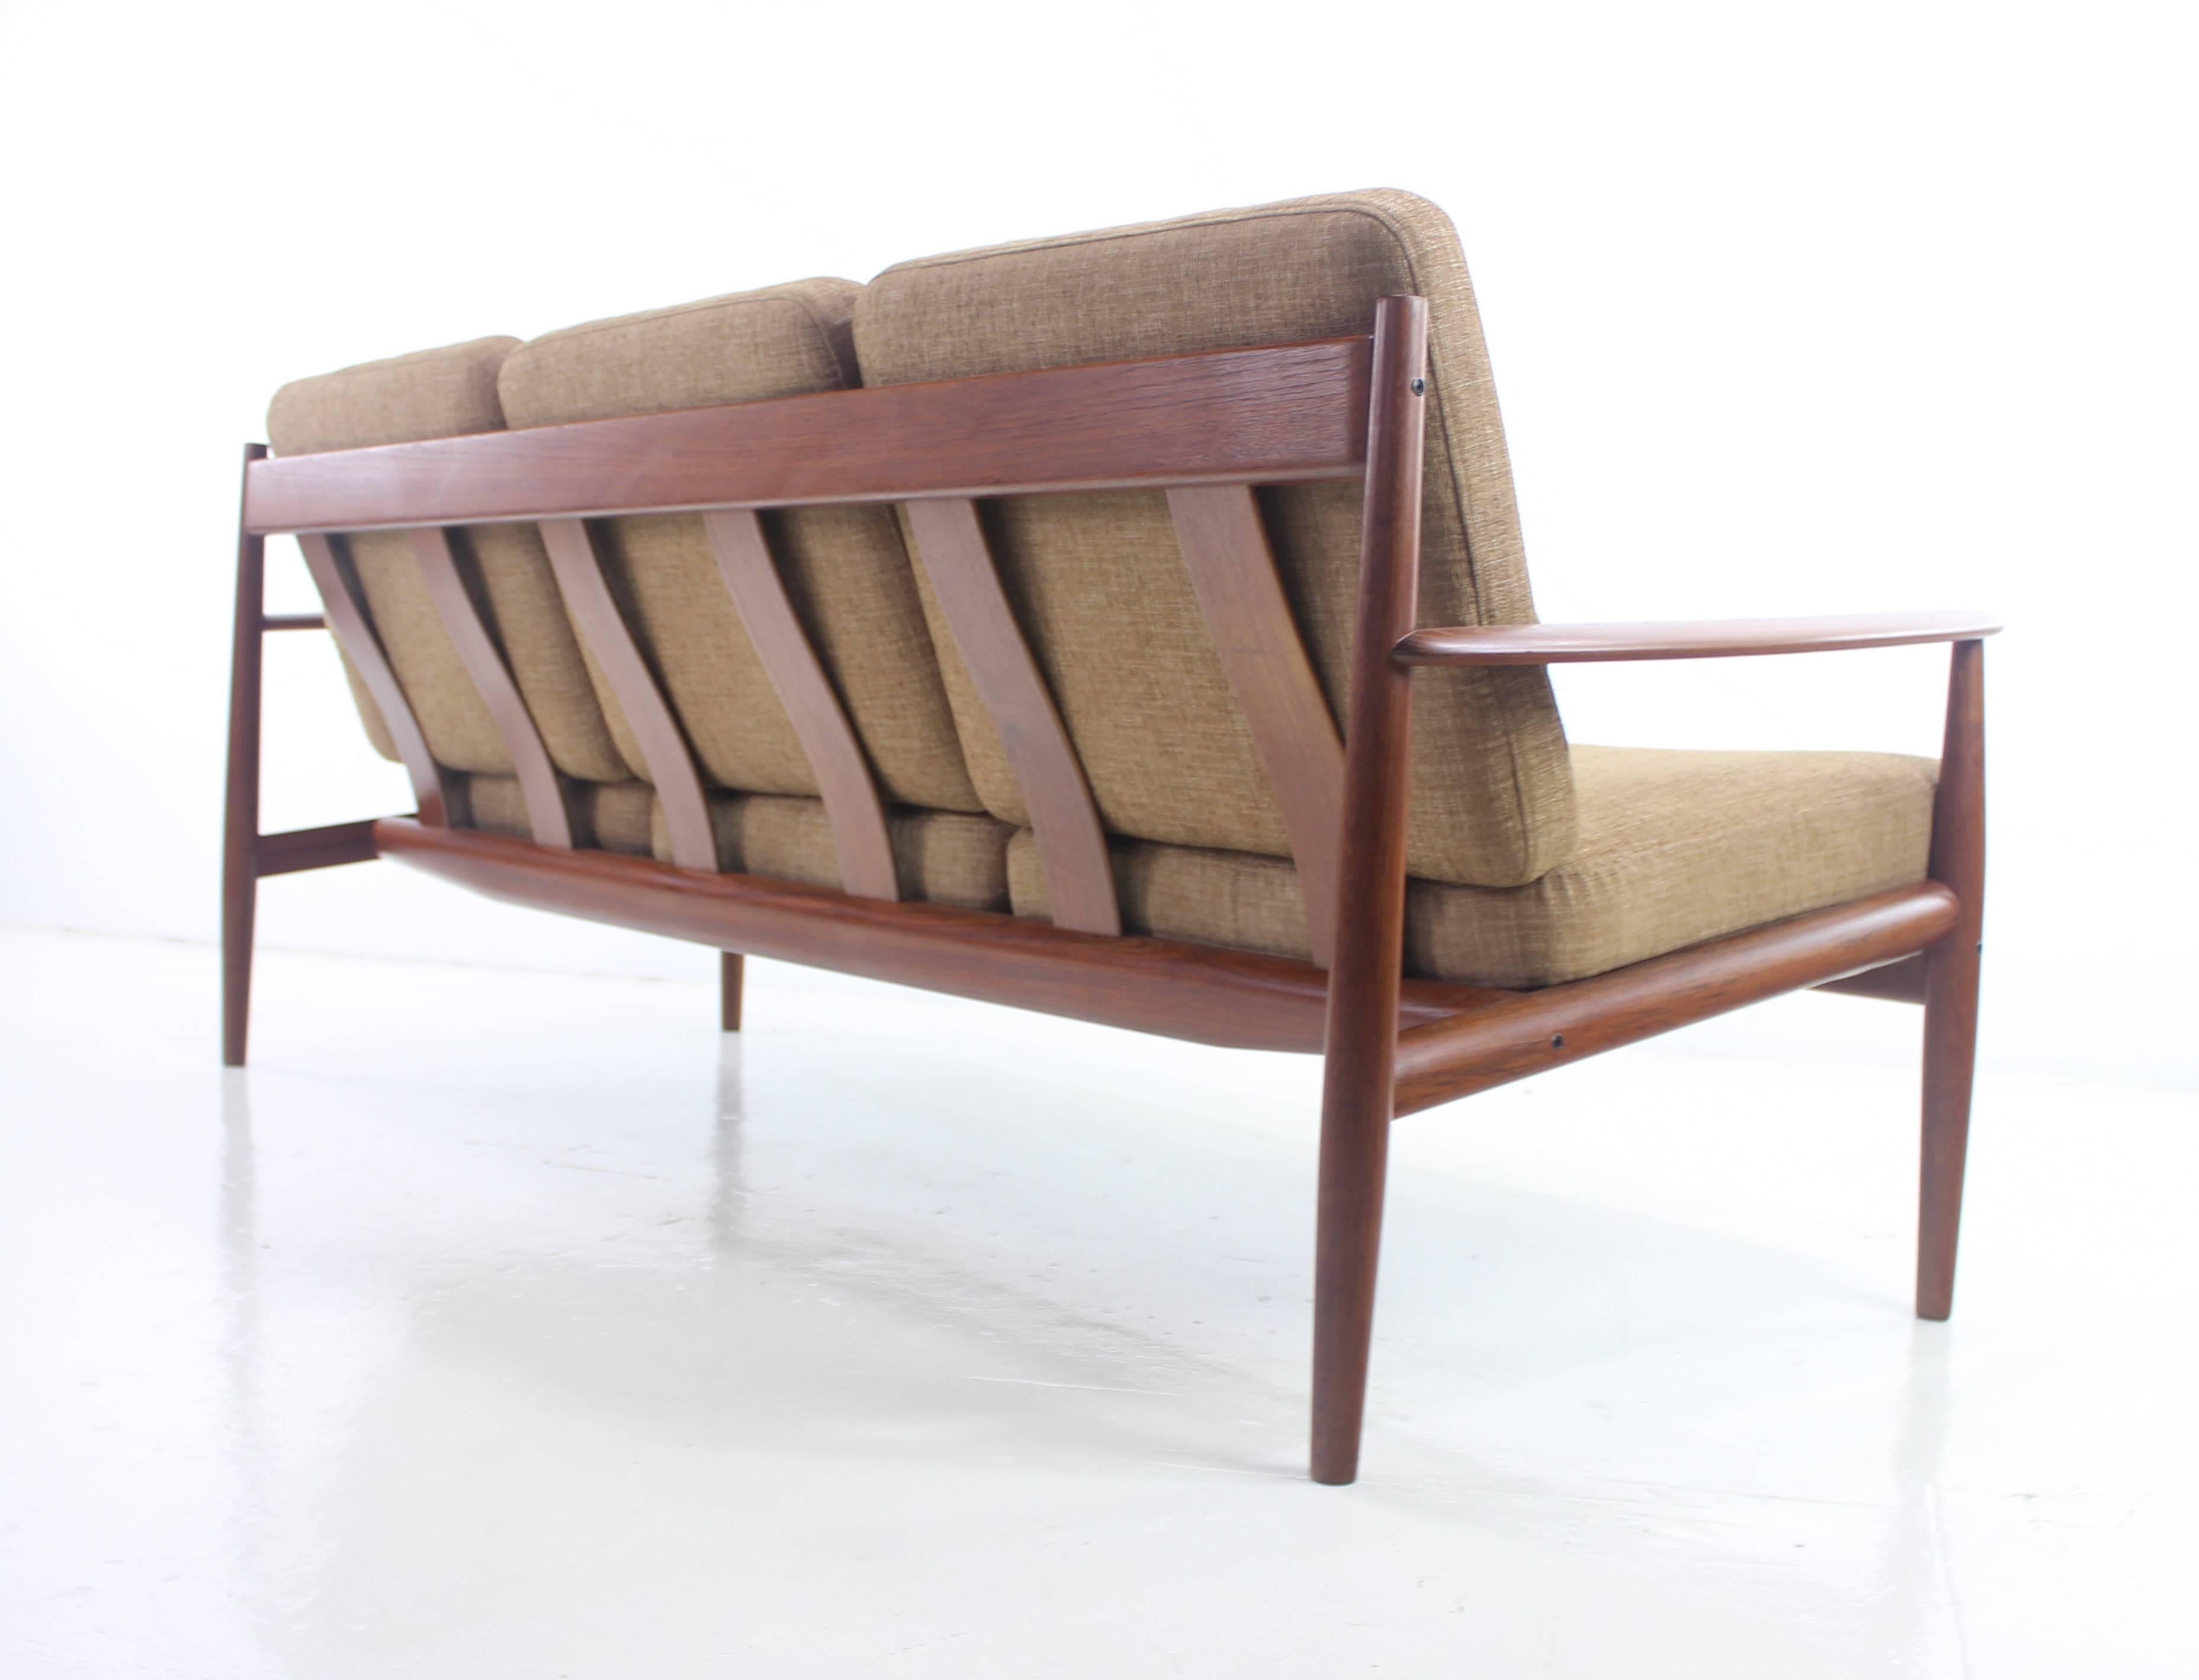 Danish Modern Three-Place Teak Framed Sofa Designed by Grete Jalk In Excellent Condition For Sale In Portland, OR